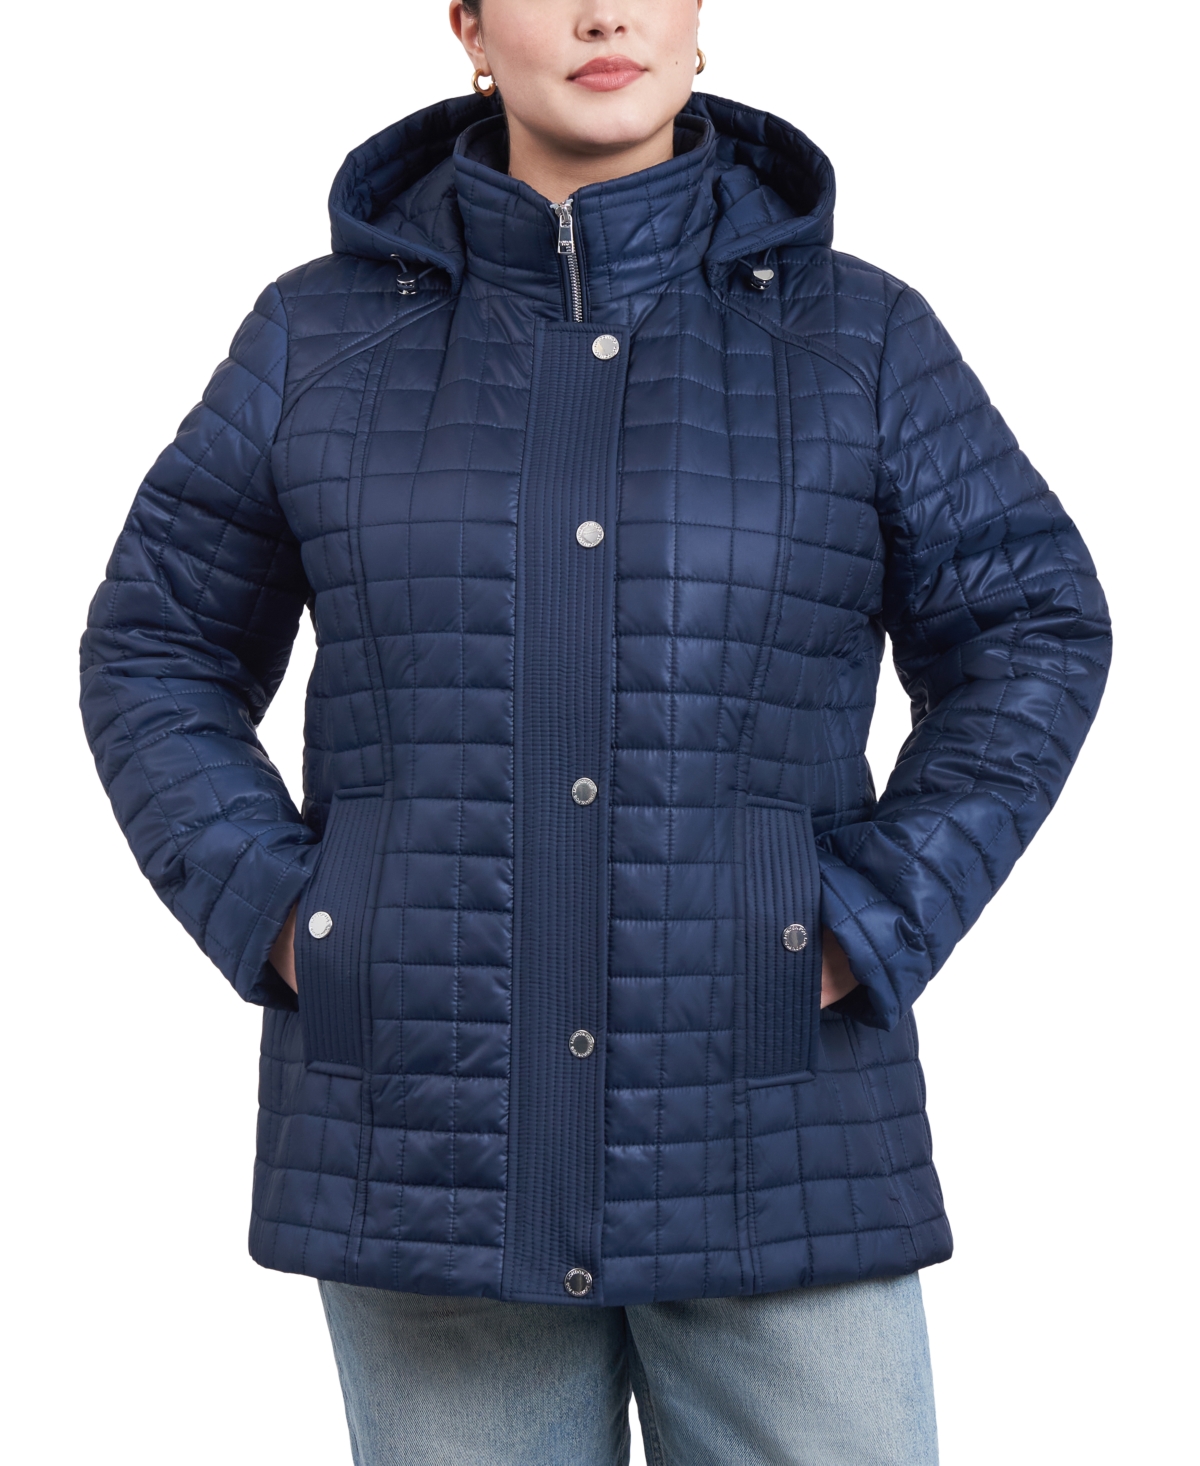 Women's Plus Size Hooded Quilted Water-Resistant Coat - Heather